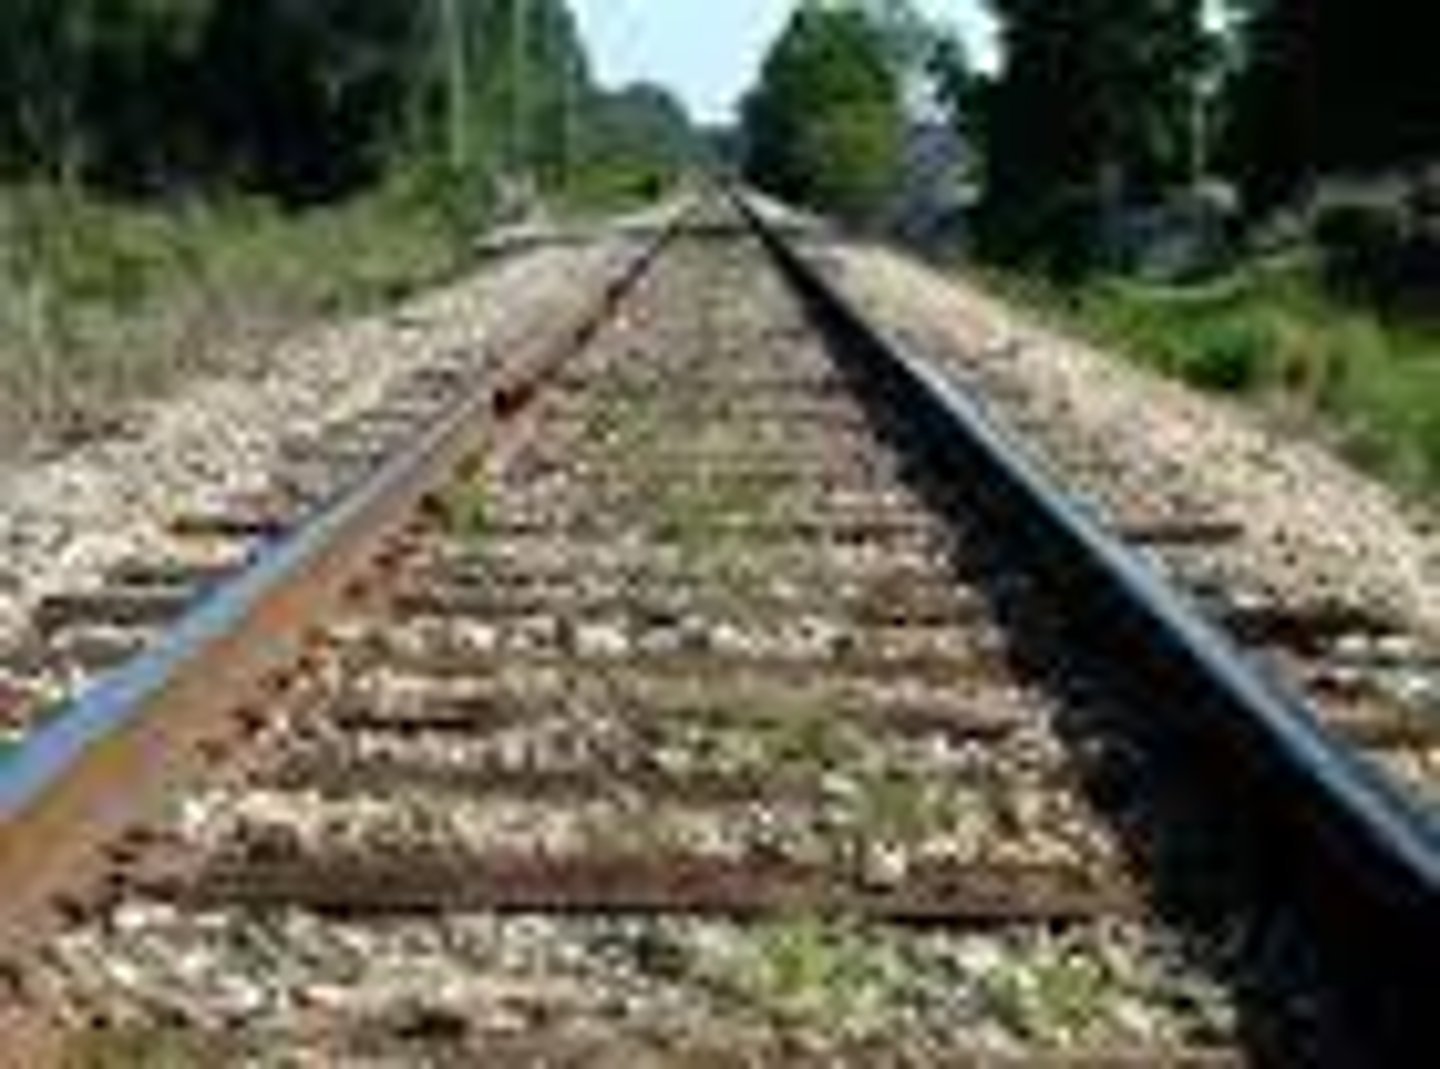 <p>Images viewed the same by BOTH eyes.</p><p>(Ex: Regardless if you cover one eye, you see the exact same image of the railroad track.)</p>